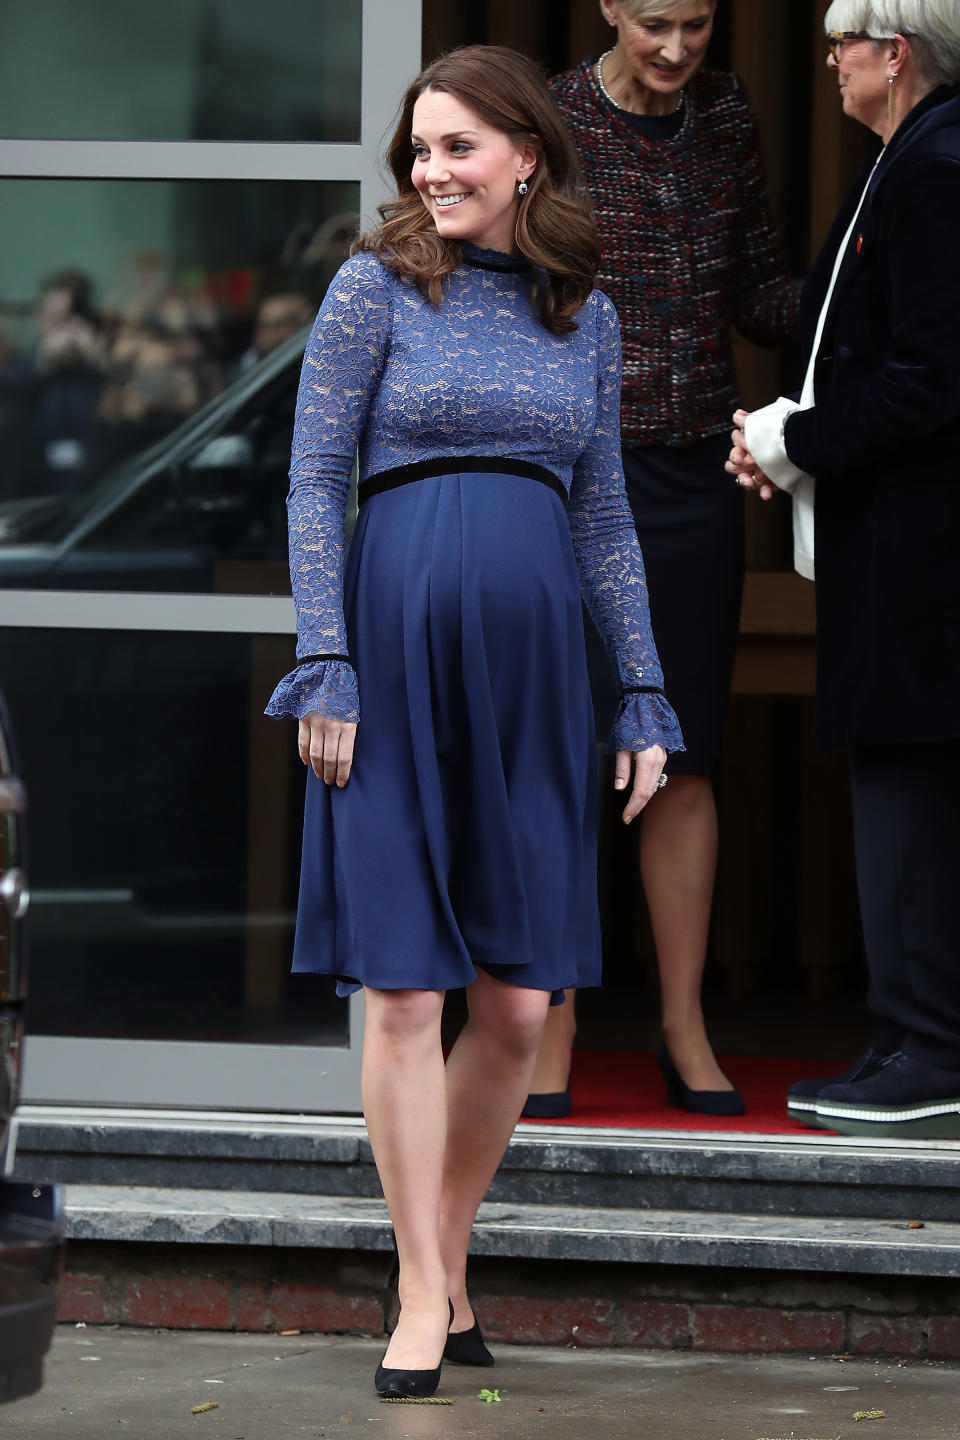 <p><strong>The occassion:</strong> To open the new Place2Be Headquarters in London.<br><strong>The look:</strong> A blue lace dress by Seraphine with a black clutch and black pumps. <br>[Photo: Getty] </p>